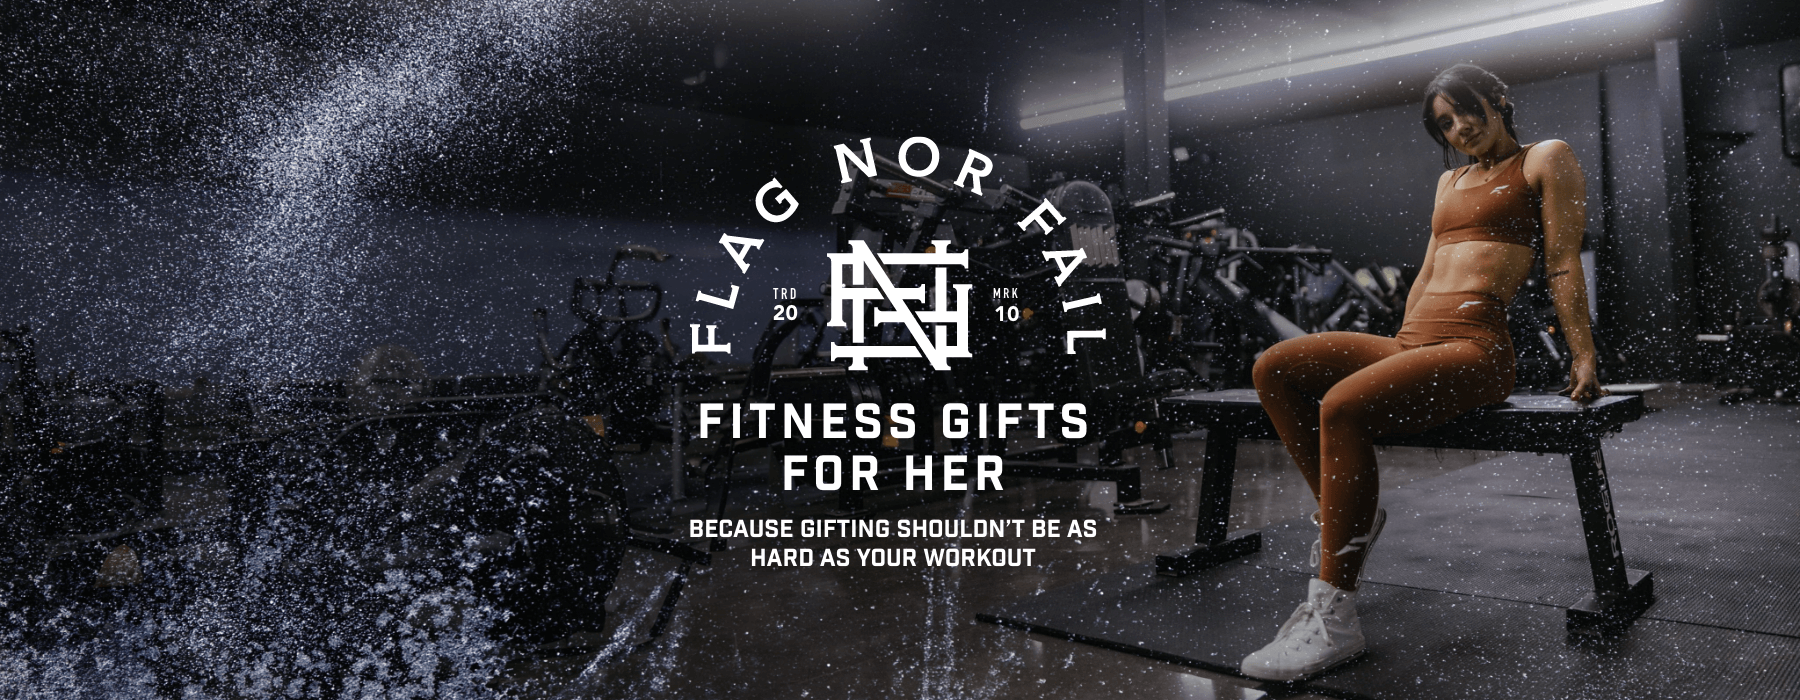 FITNESS GIFT GUIDE FOR HER